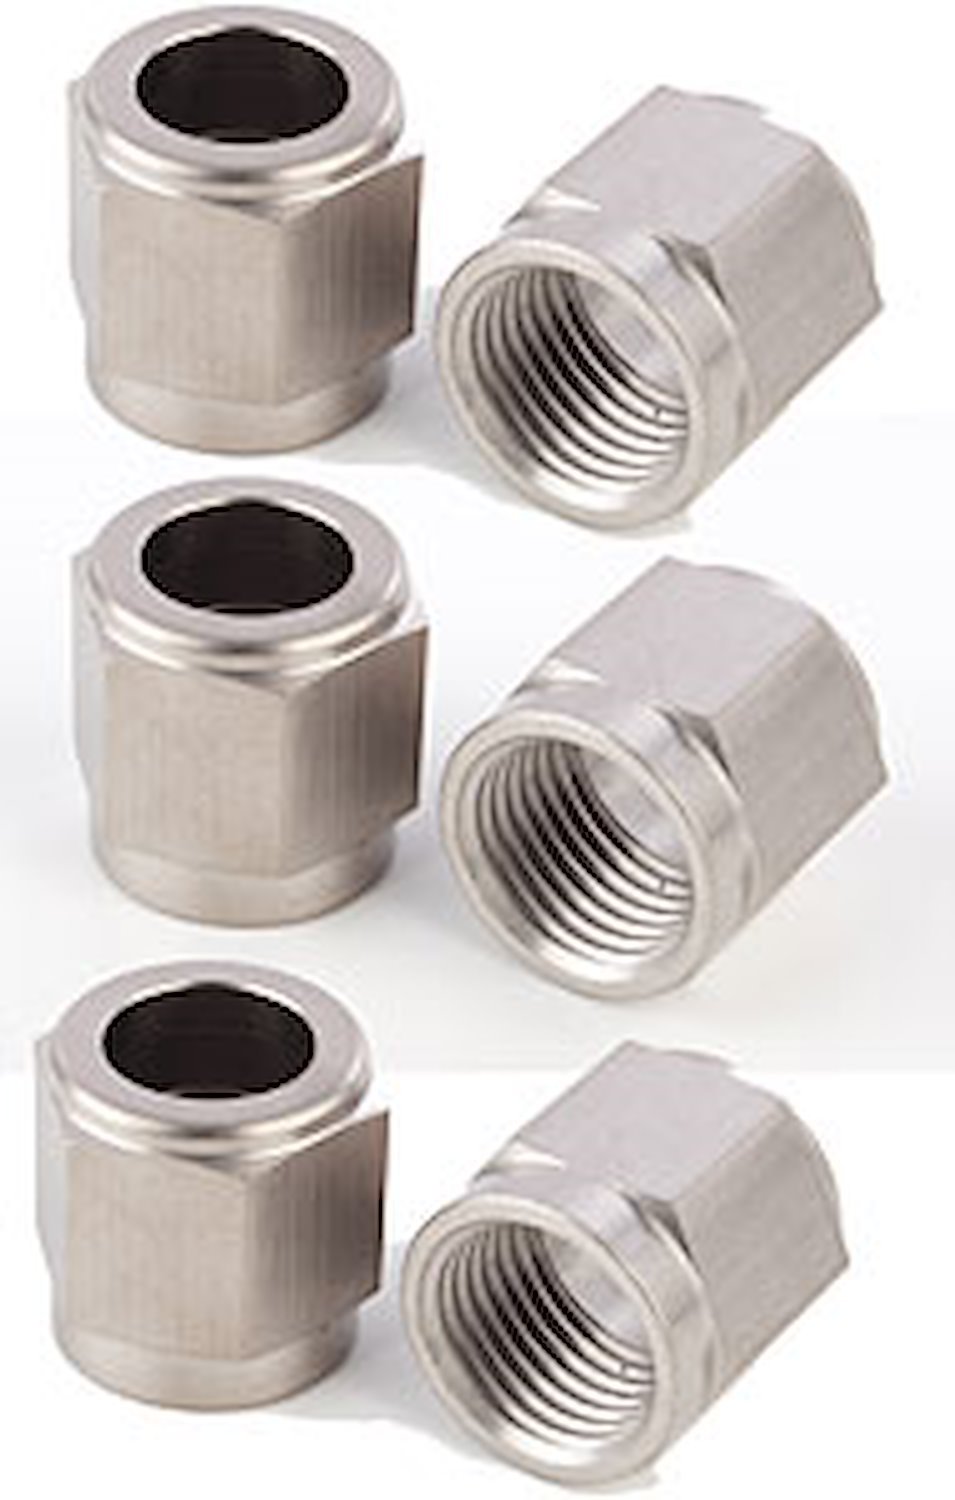 Tube Nuts, Electroless Nickel Plated Aluminum [-3 AN]